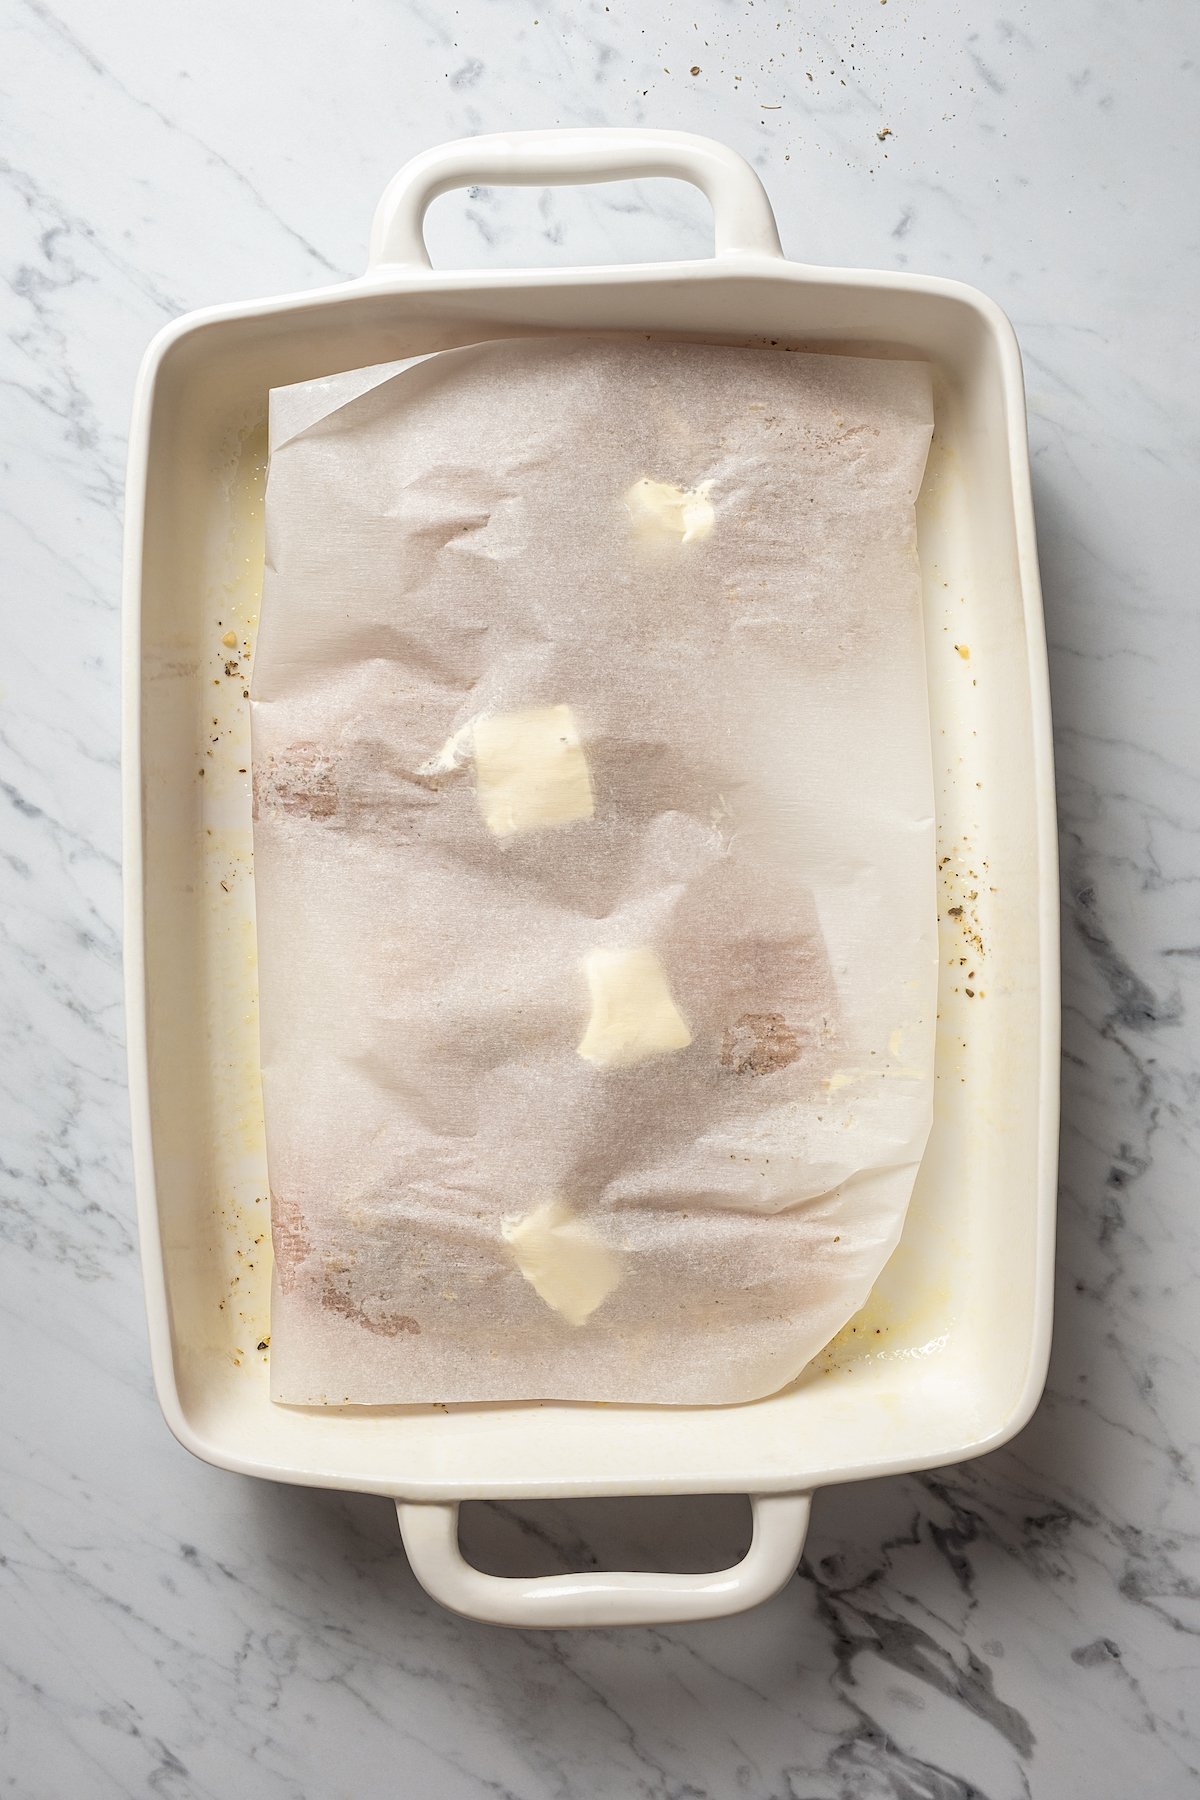 Chicken breasts in baking dish with butter and parchment paper